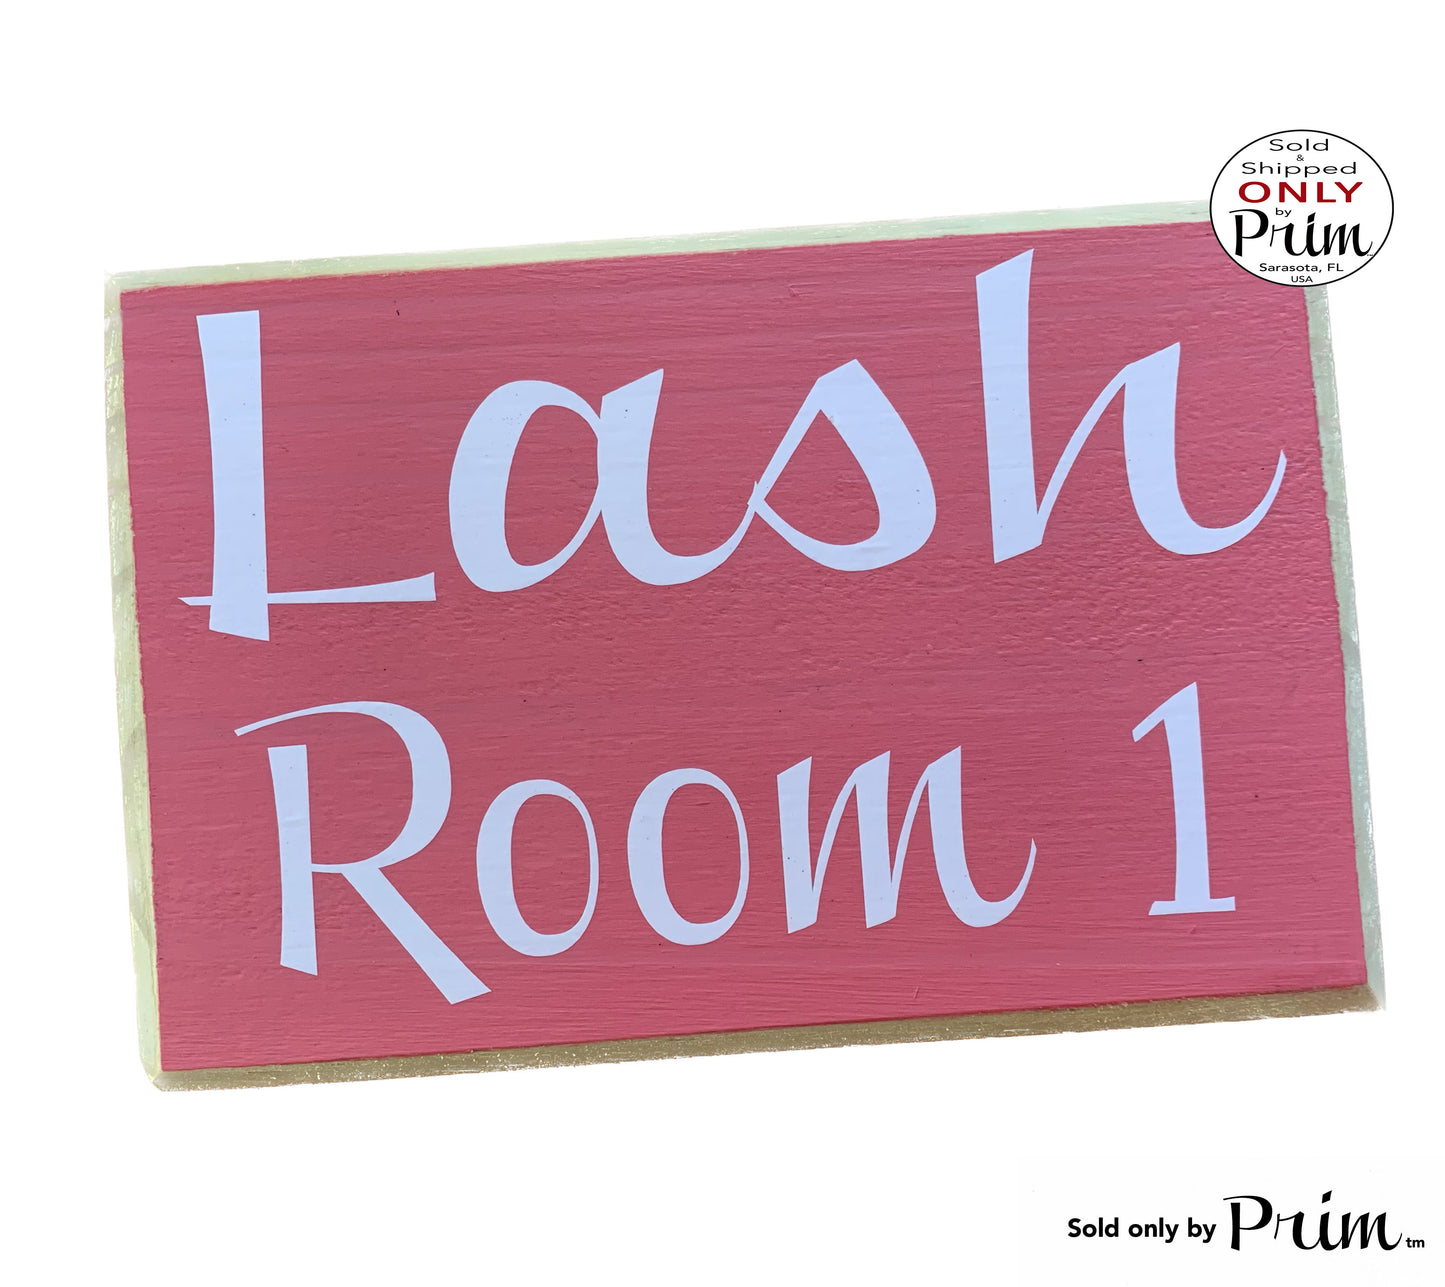 Designs by Prim 8x6 Lash Room Number Custom Wood Sign Extensions Welcome Office Spa Eyelash Eyebrow Relaxation Meditation Brow Waiting Room Wall Door Plaque